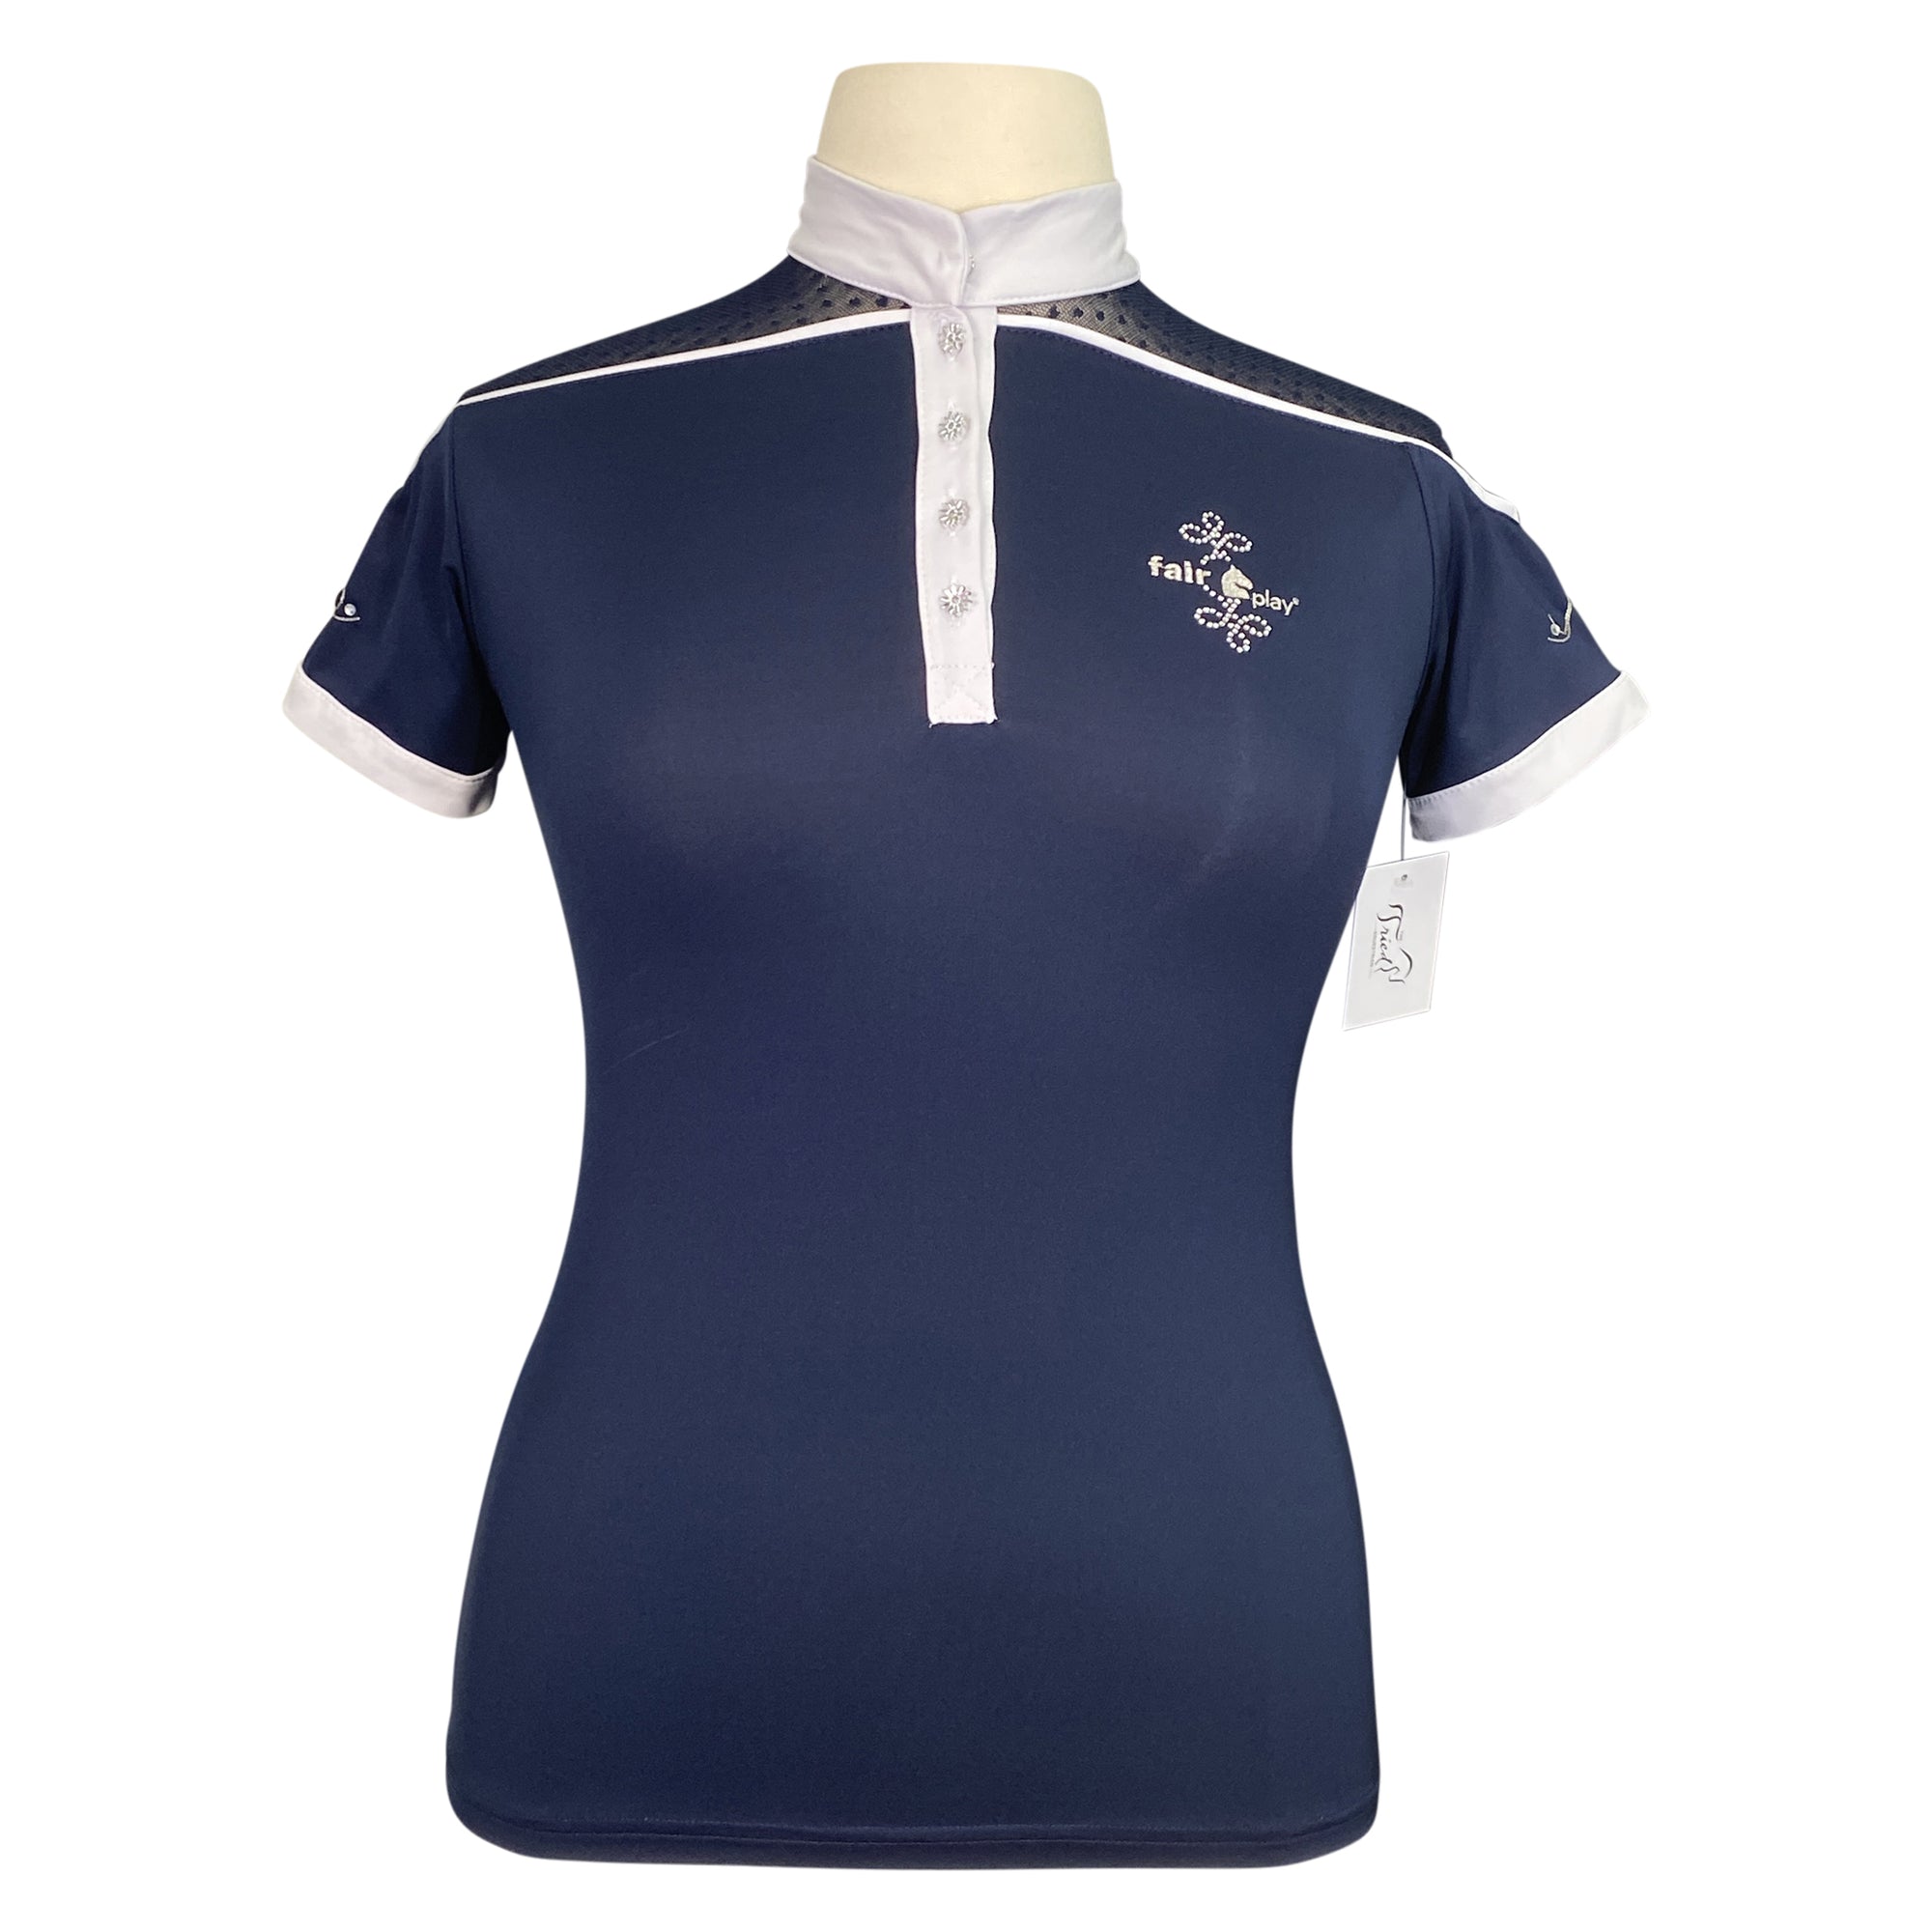 Fair Play &#39;Letizia&#39; Short Sleeve Competition Shirt in Navy/White